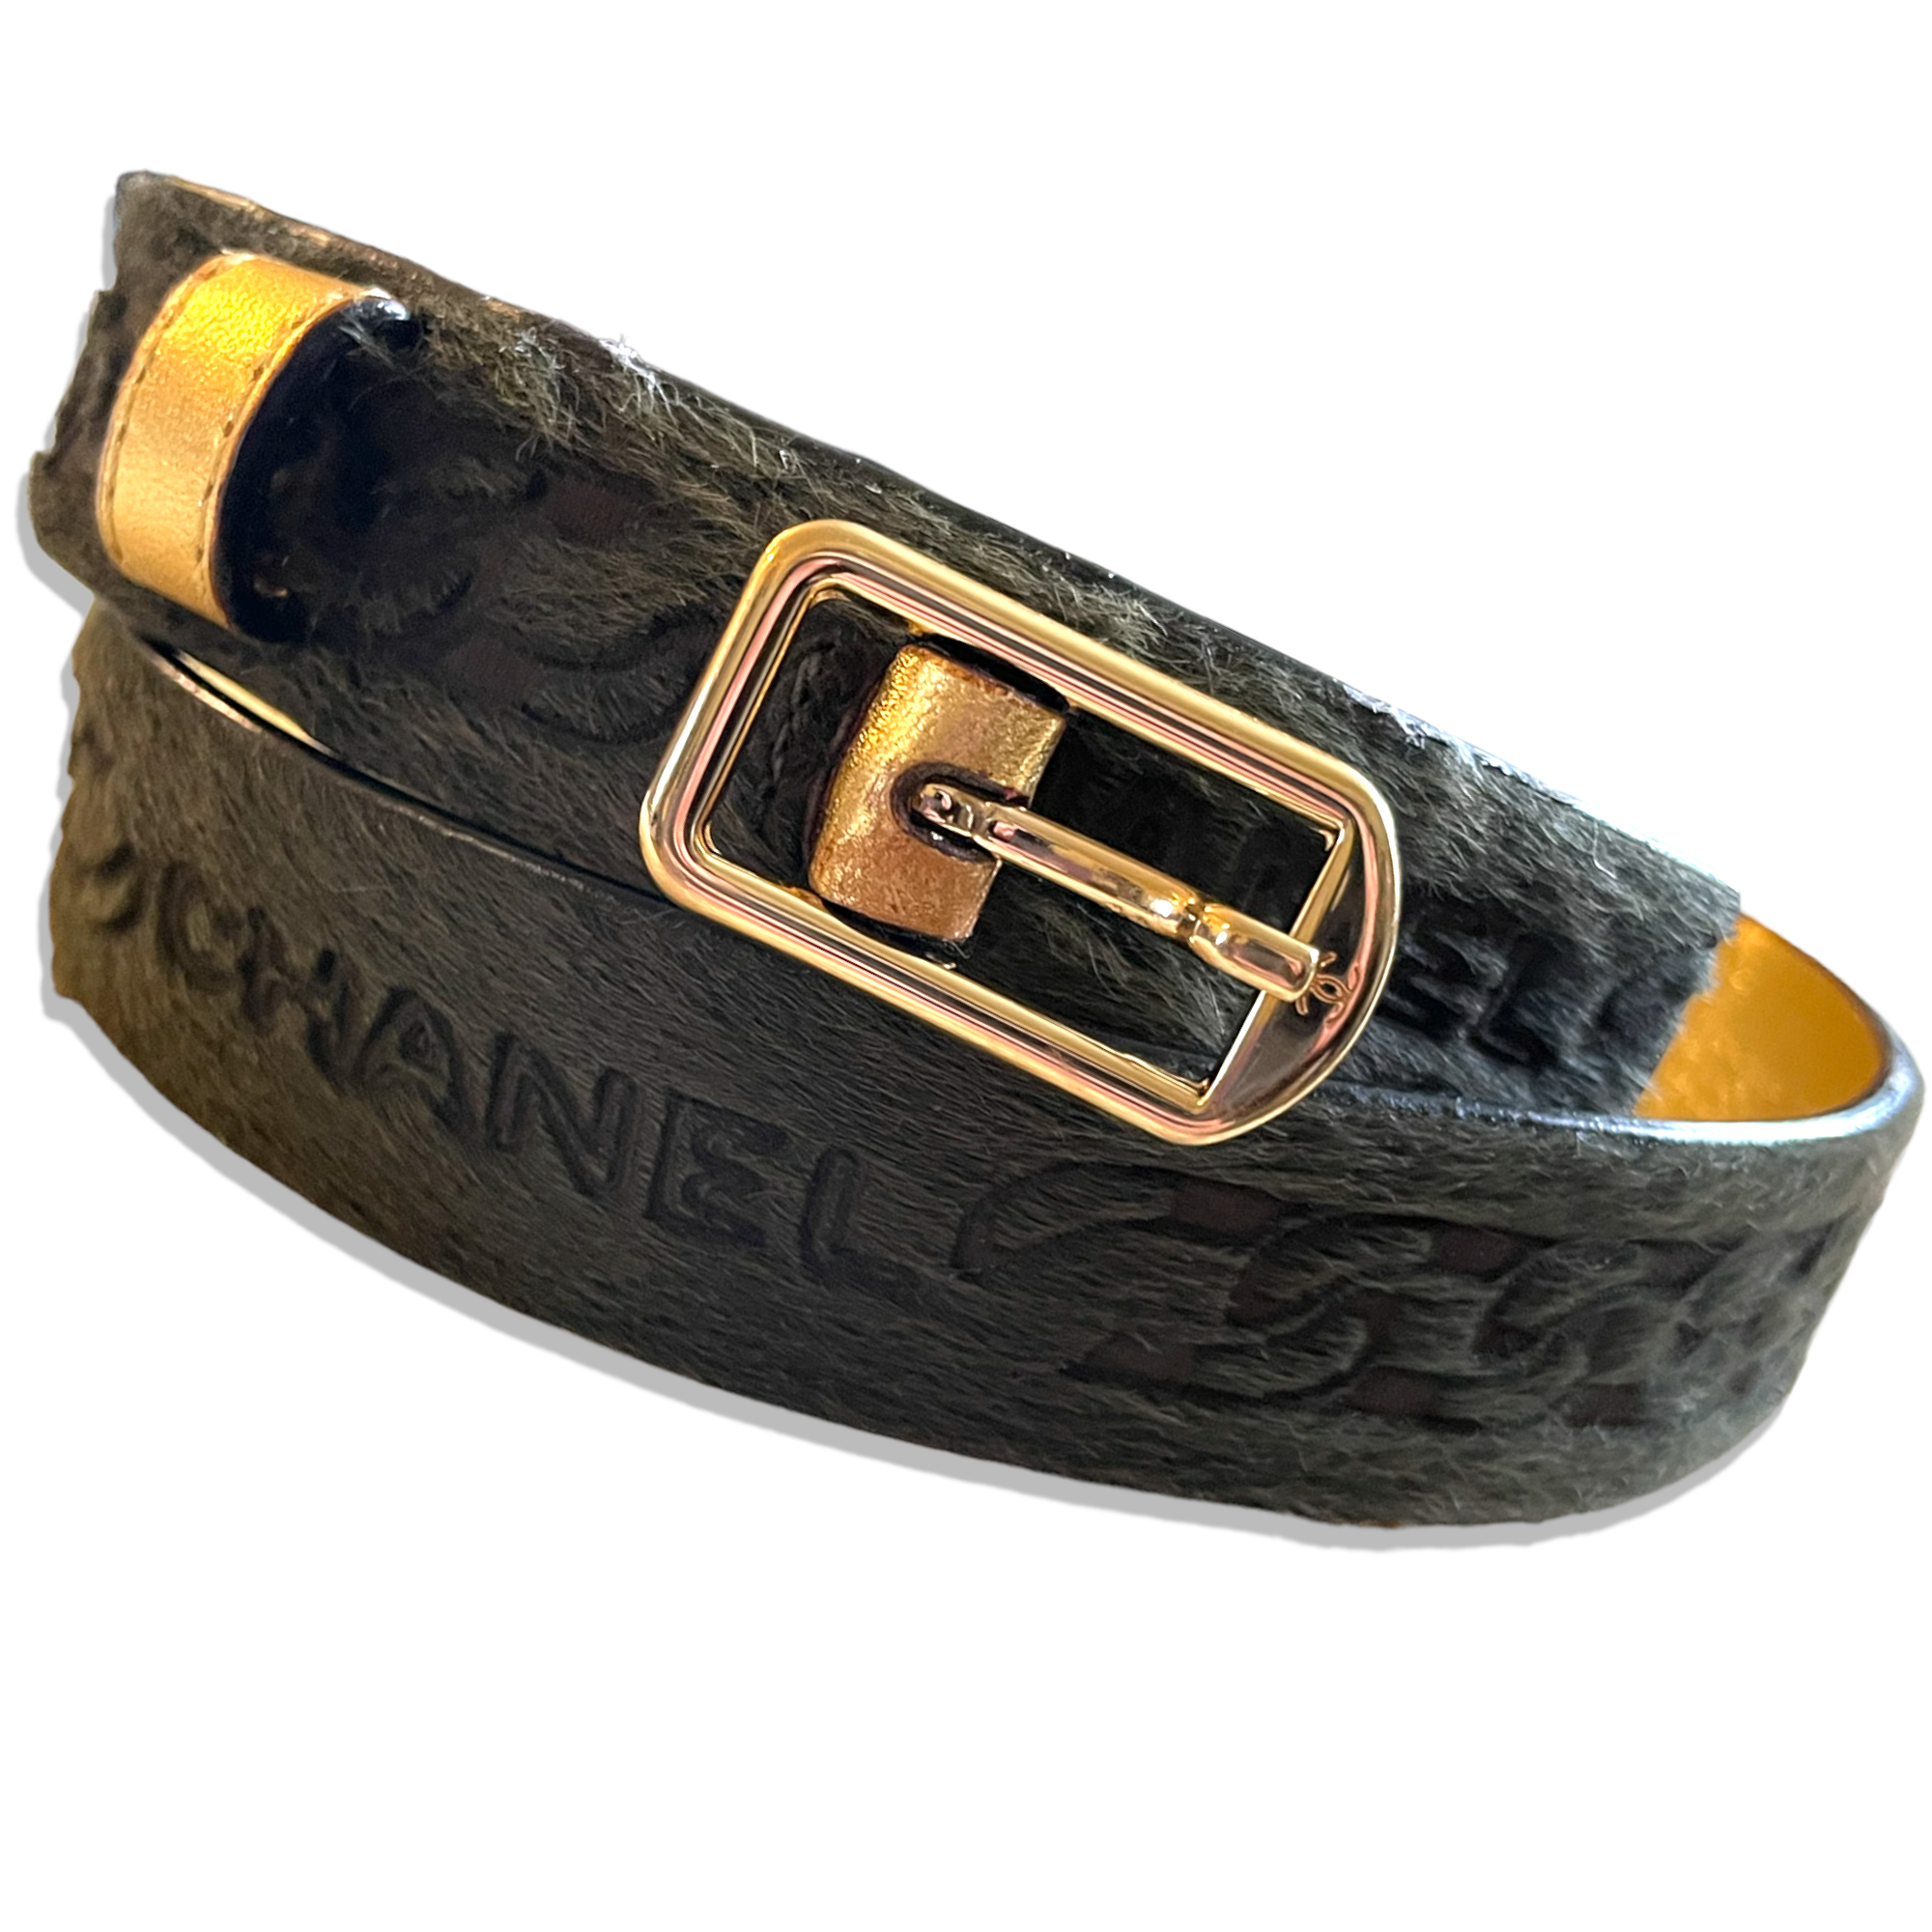 CHANEL Buckle Belt Calf Hair and Leather |Size: 70|